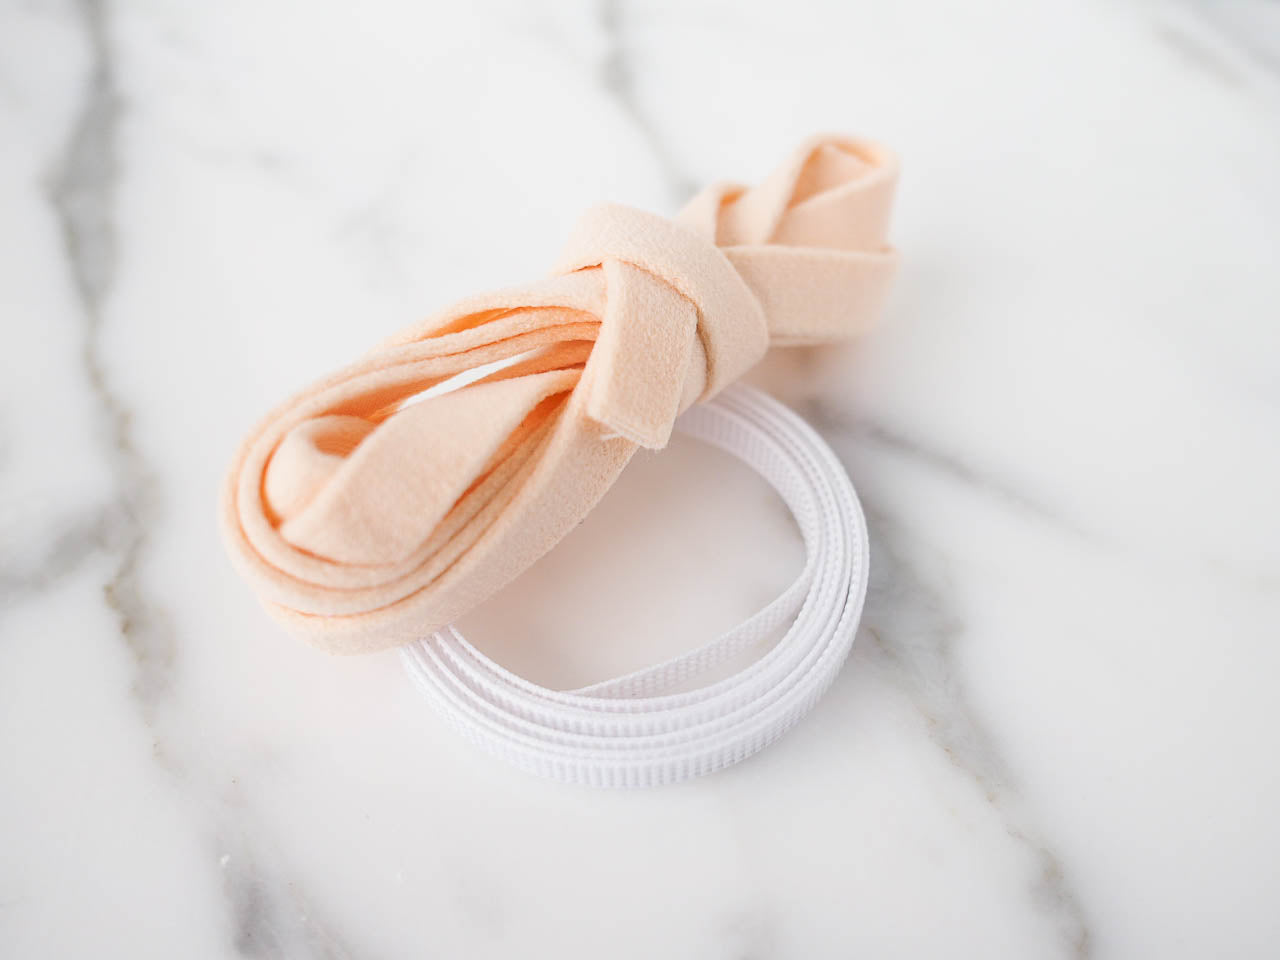 An Easy Way to Add Support to your Bra - Orange Lingerie